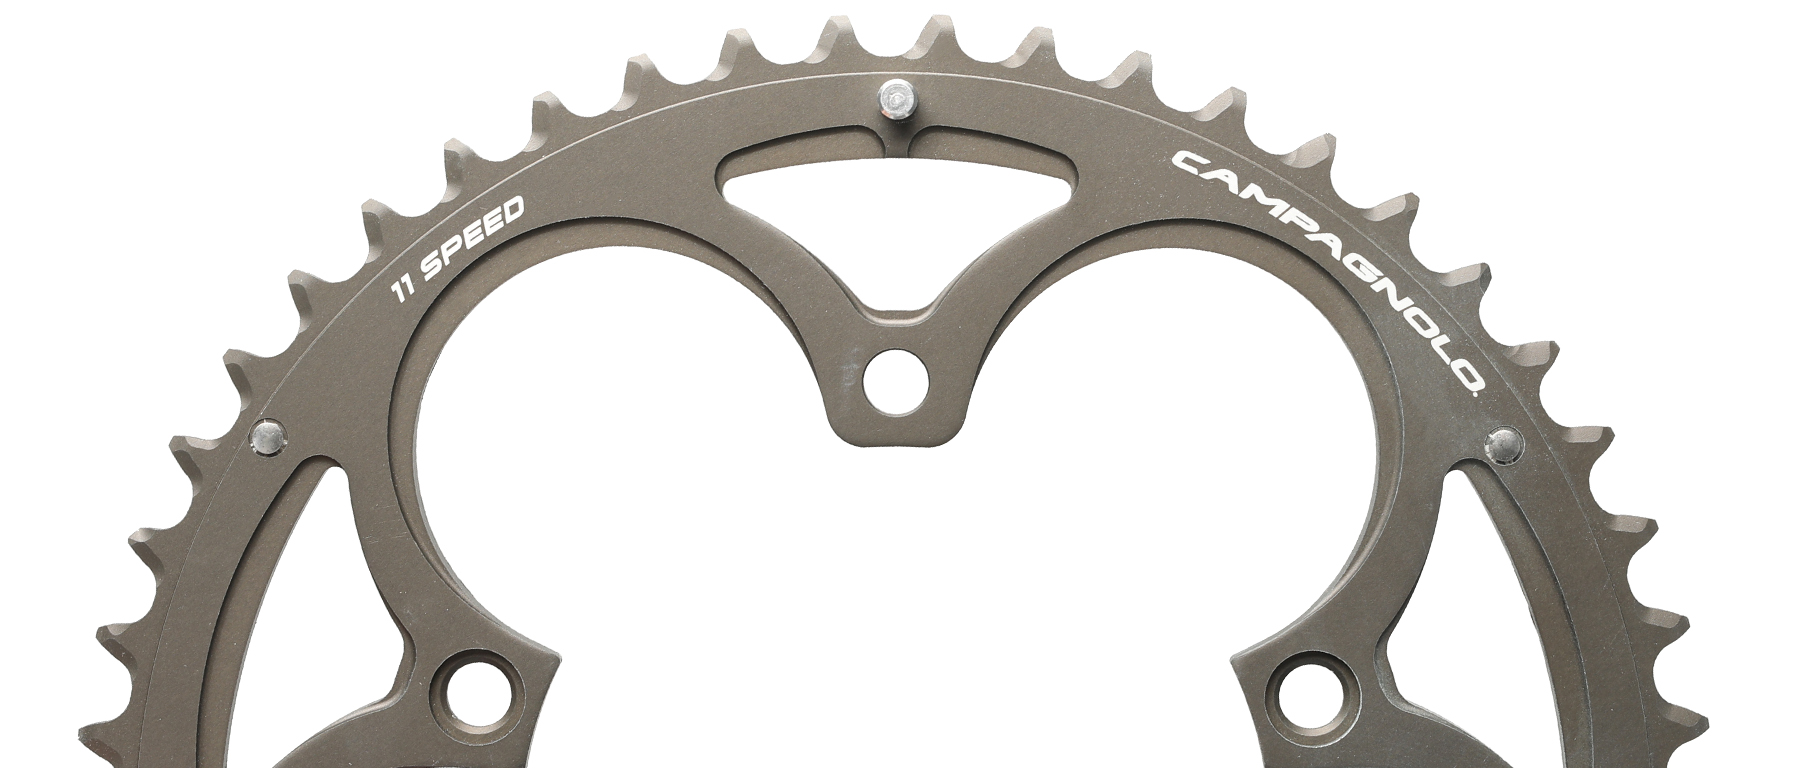 Campagnolo Record 11-Speed Outer Chainring